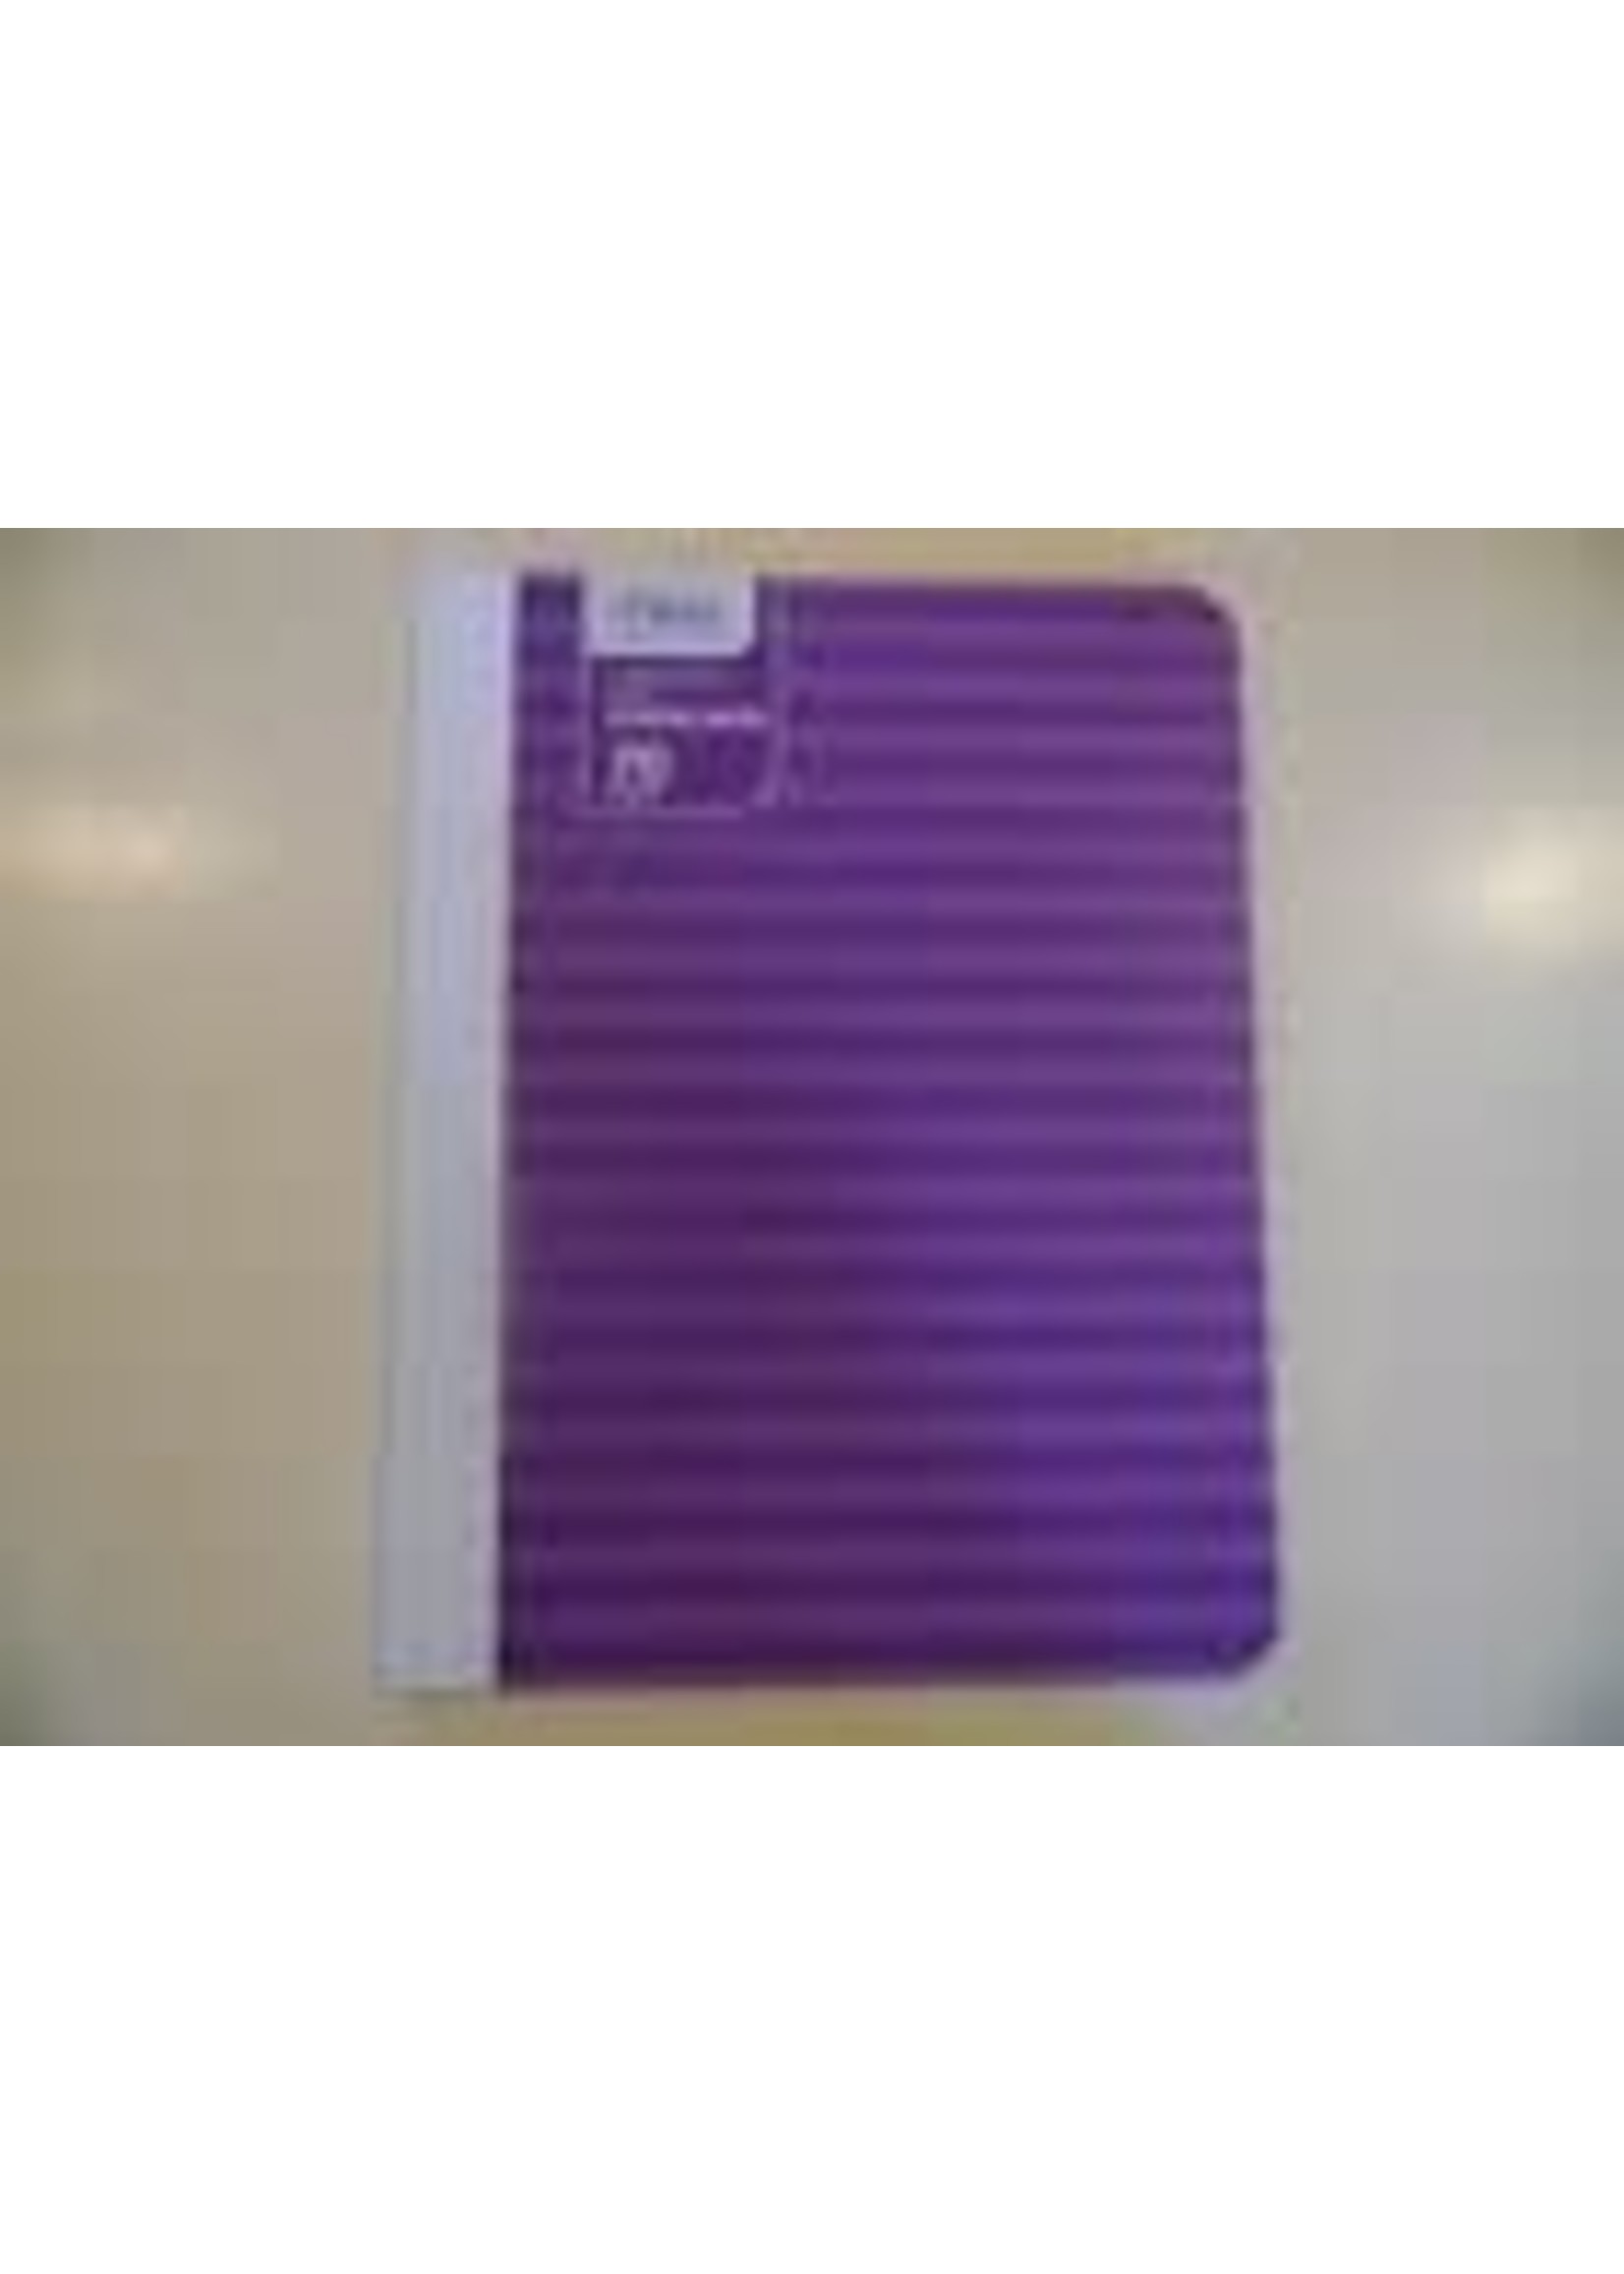 Mead College Ruled Composition Notebook Purple or Pink